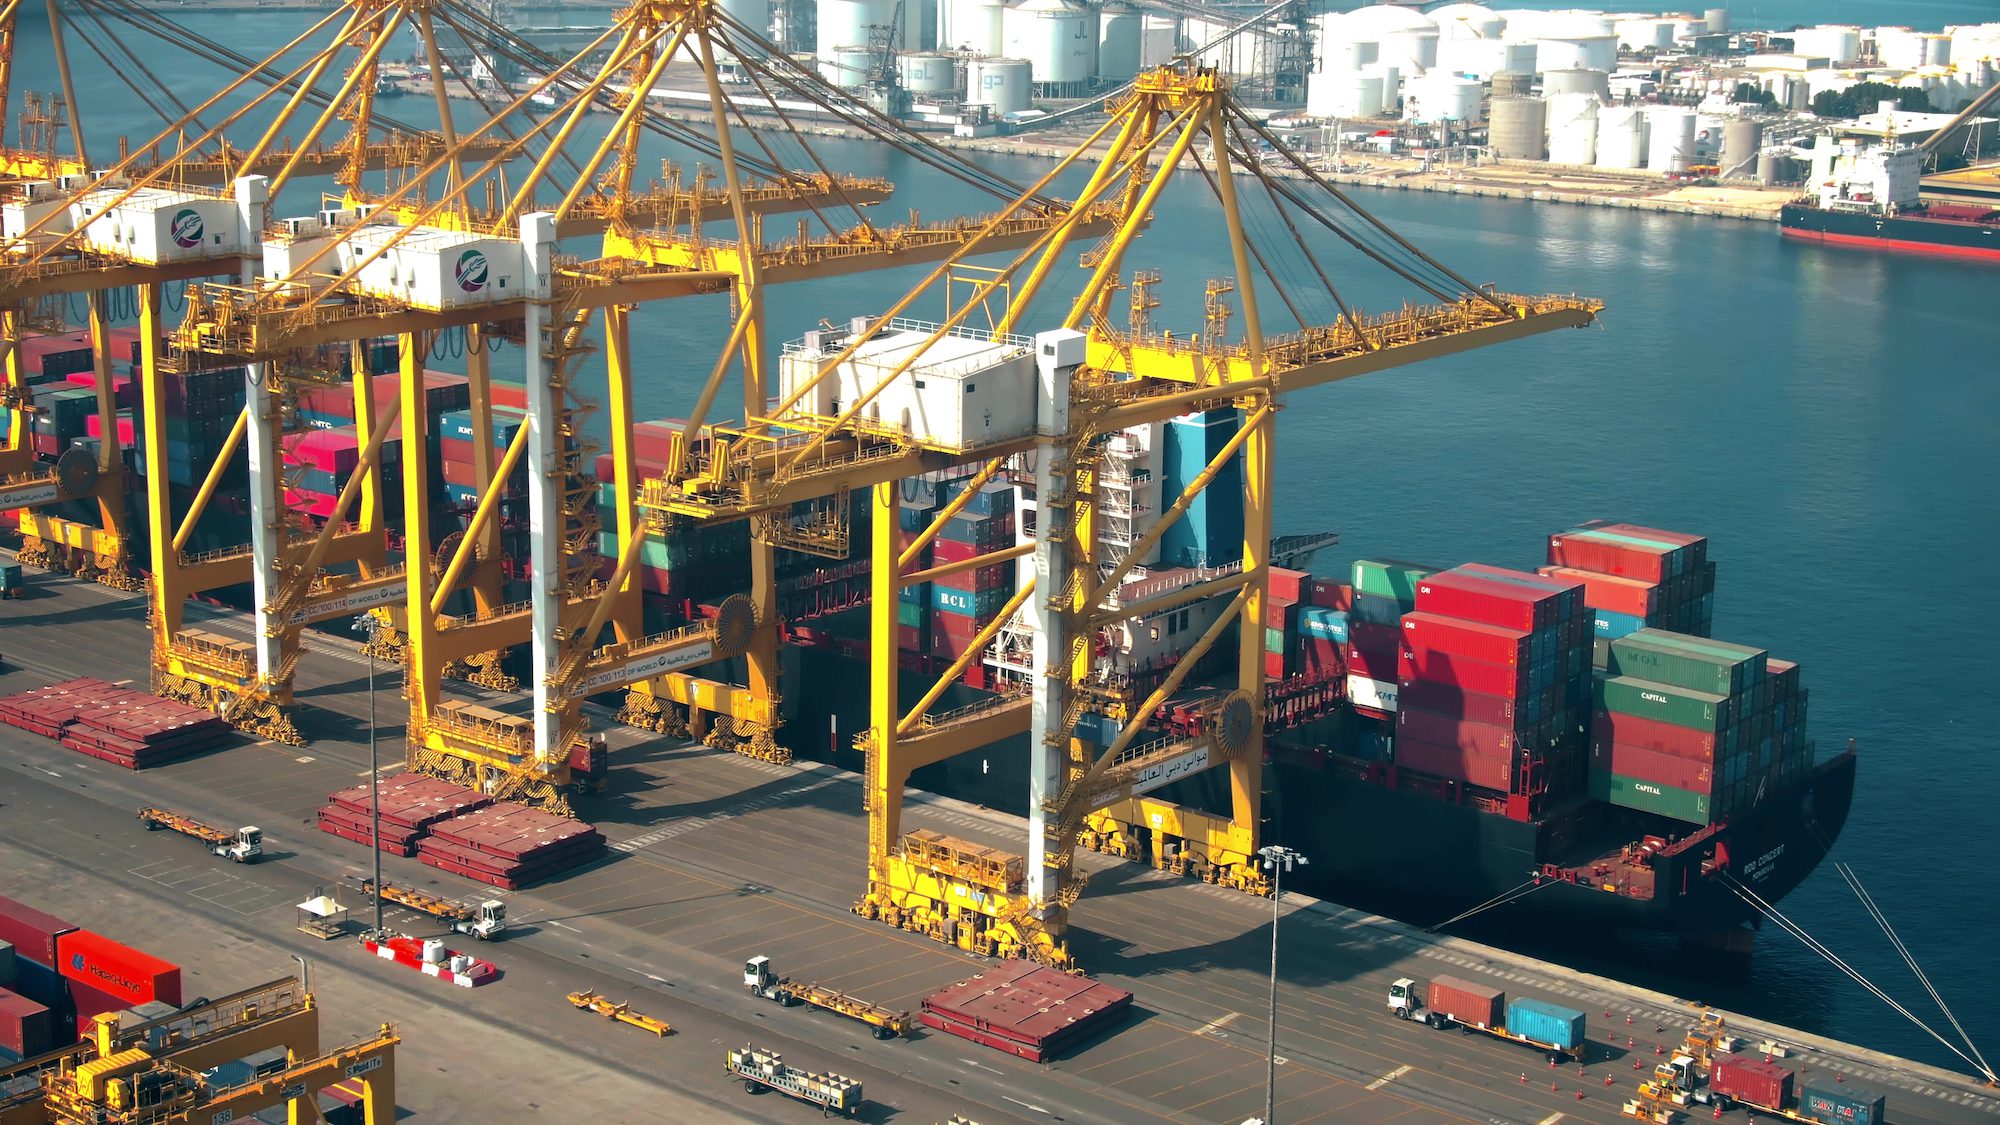 Containership and cranes at DP World Jebel Ali